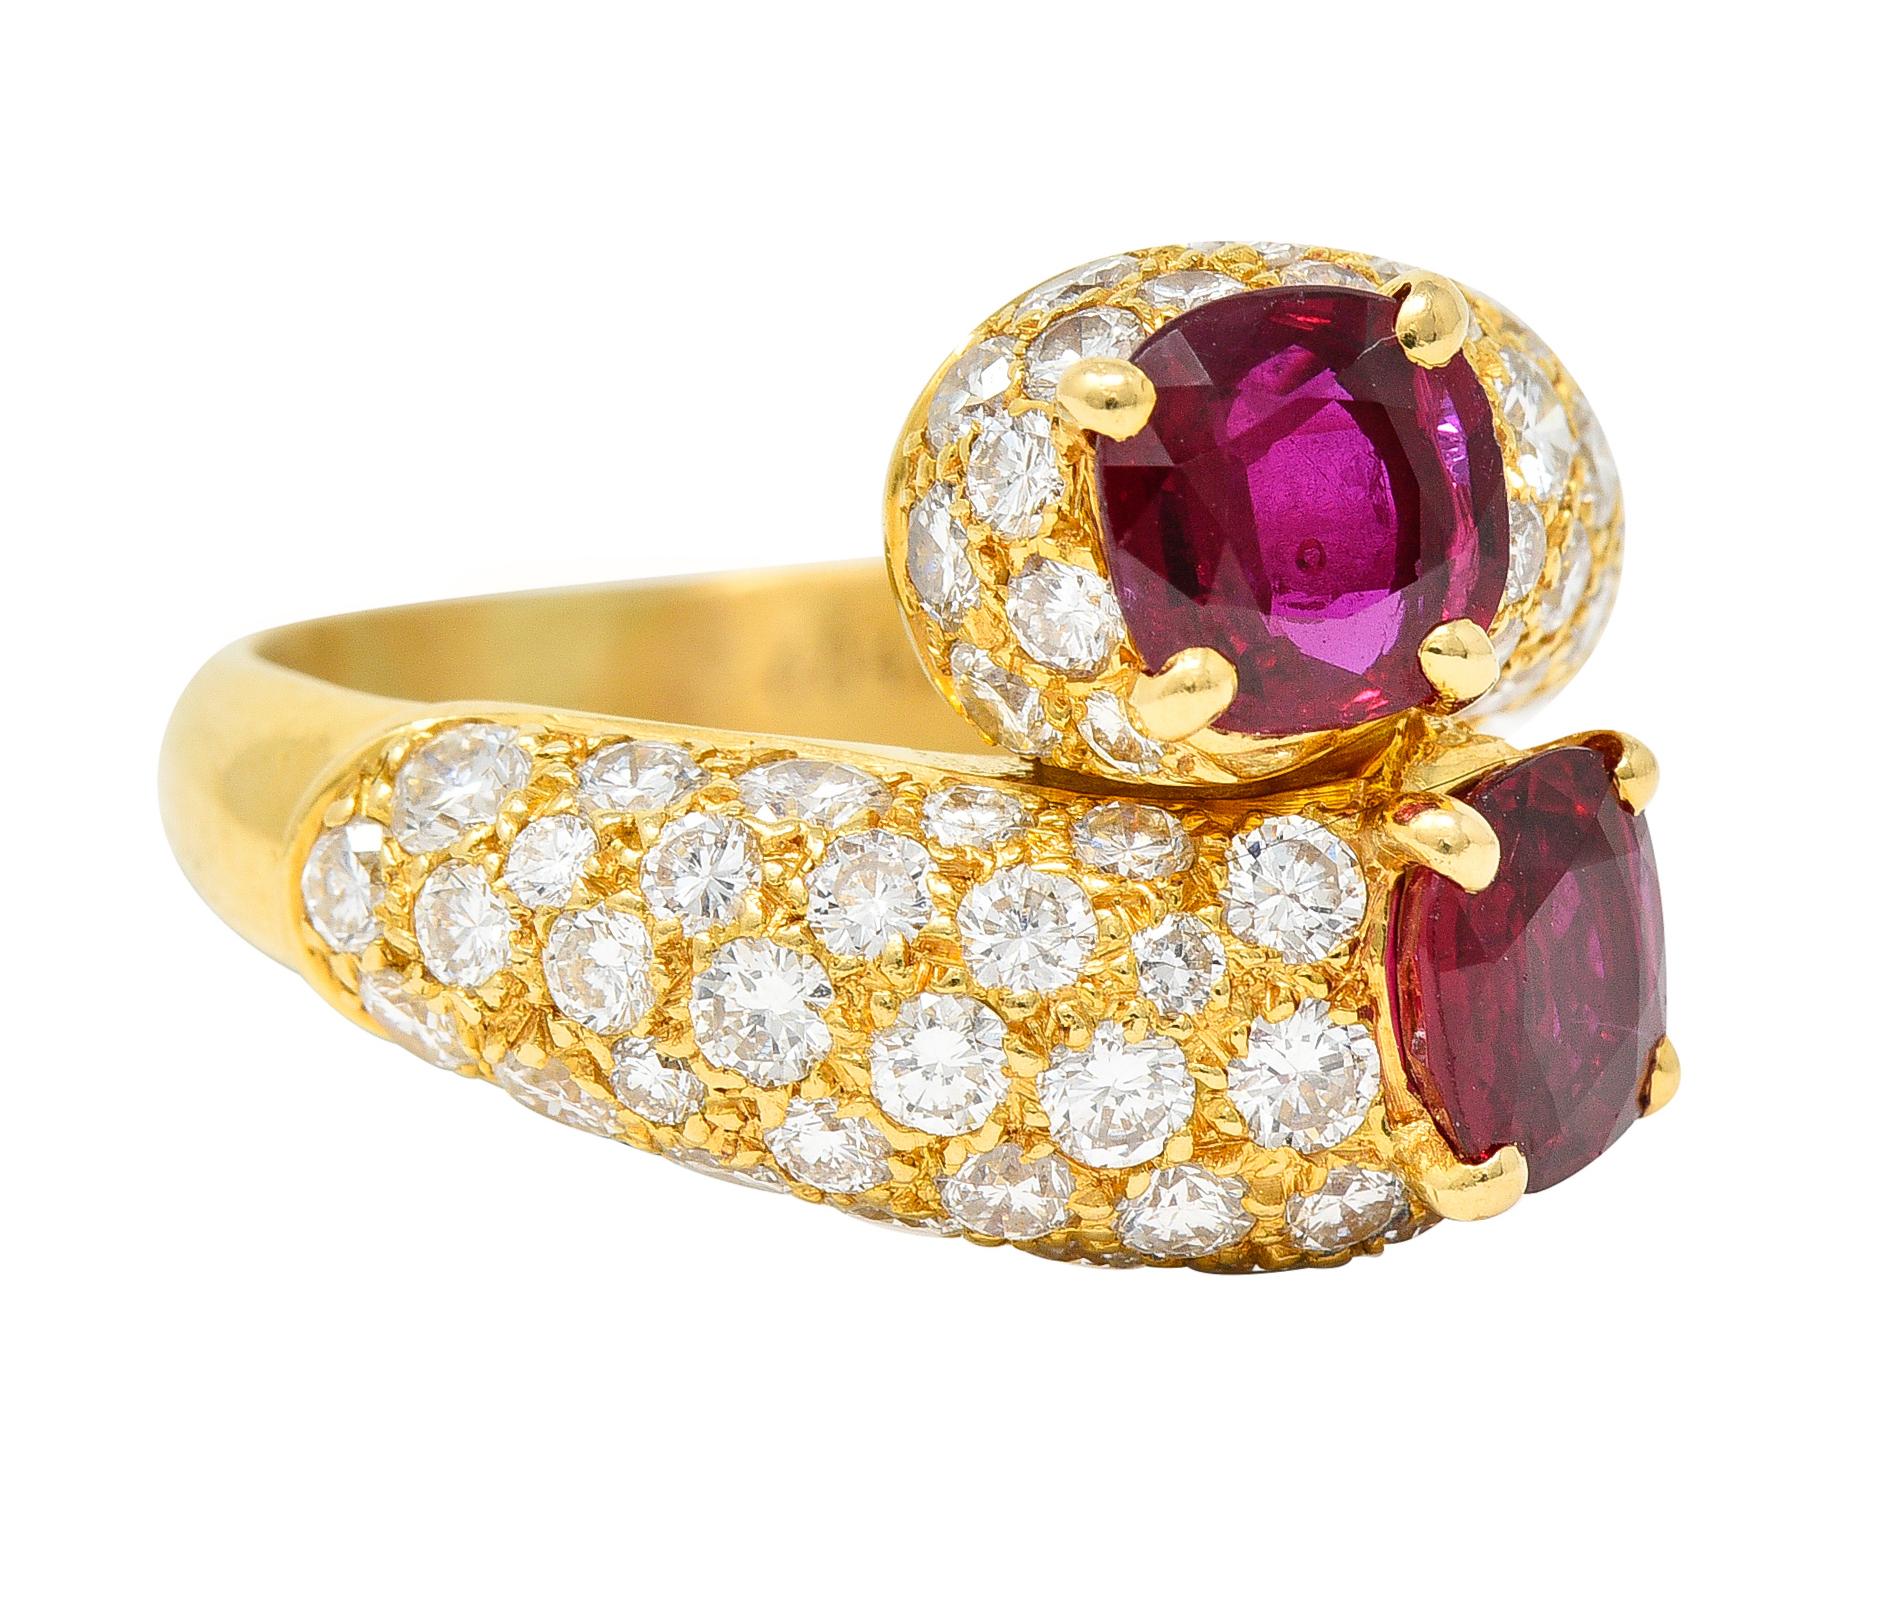 Bypass ring features two round cut Thai rubies weighing collectively approximately 1.90 carats. Very well matched in vivid red color - eye clean. Prong set atop bombè formed shoulders pavè set throughout by round brilliant cut diamonds. Weighing in